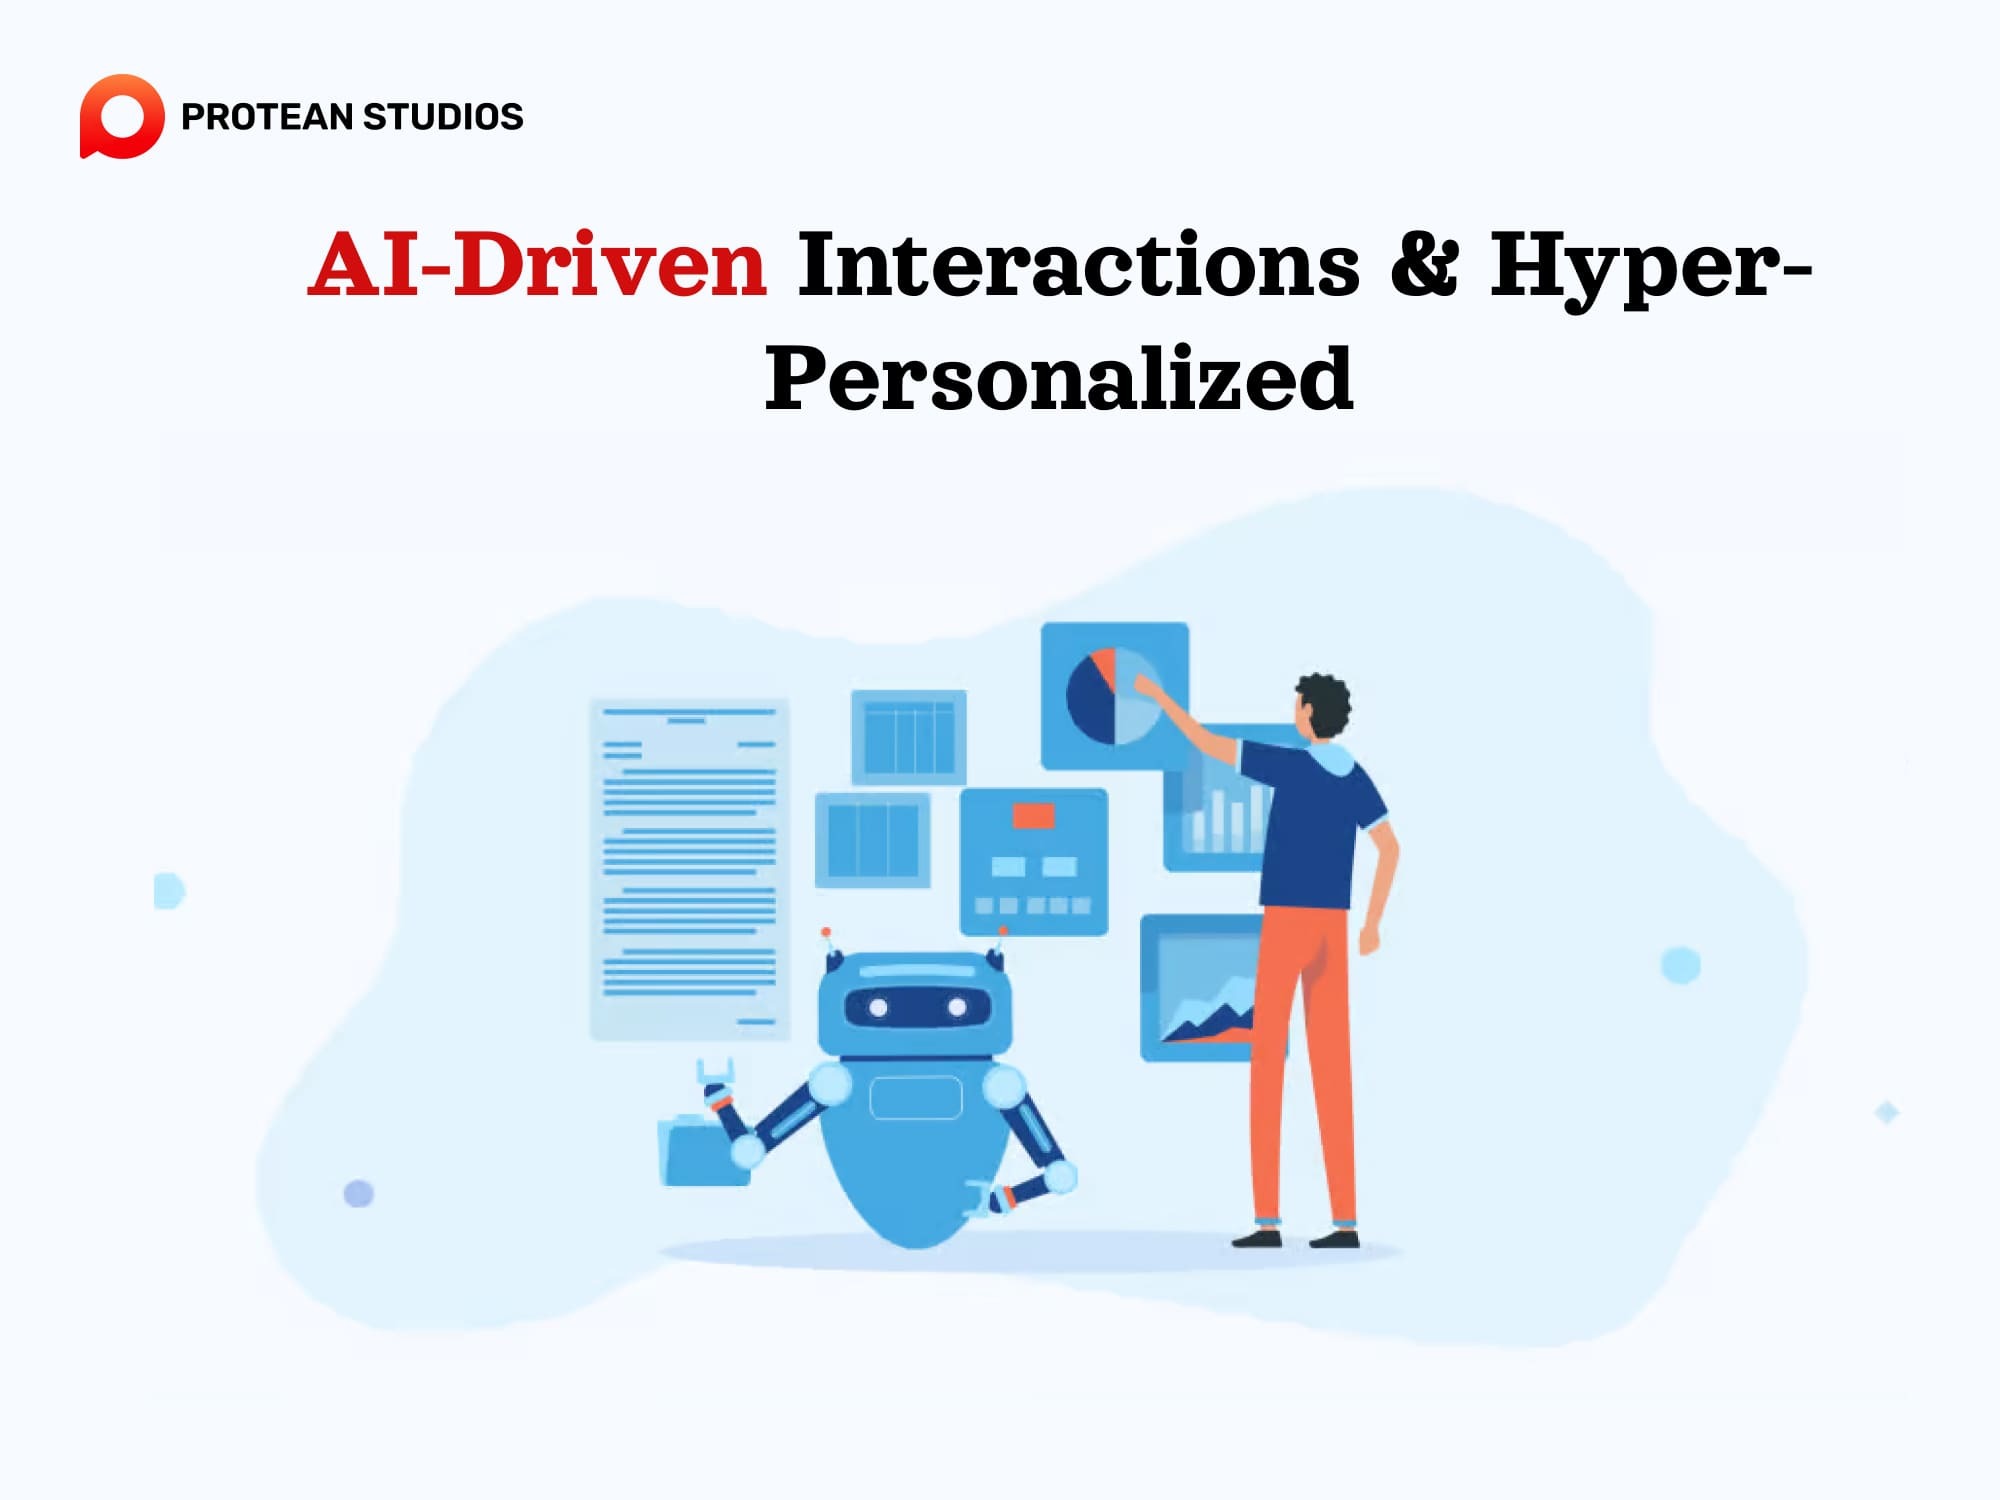 AI-driven interaction is a new trend